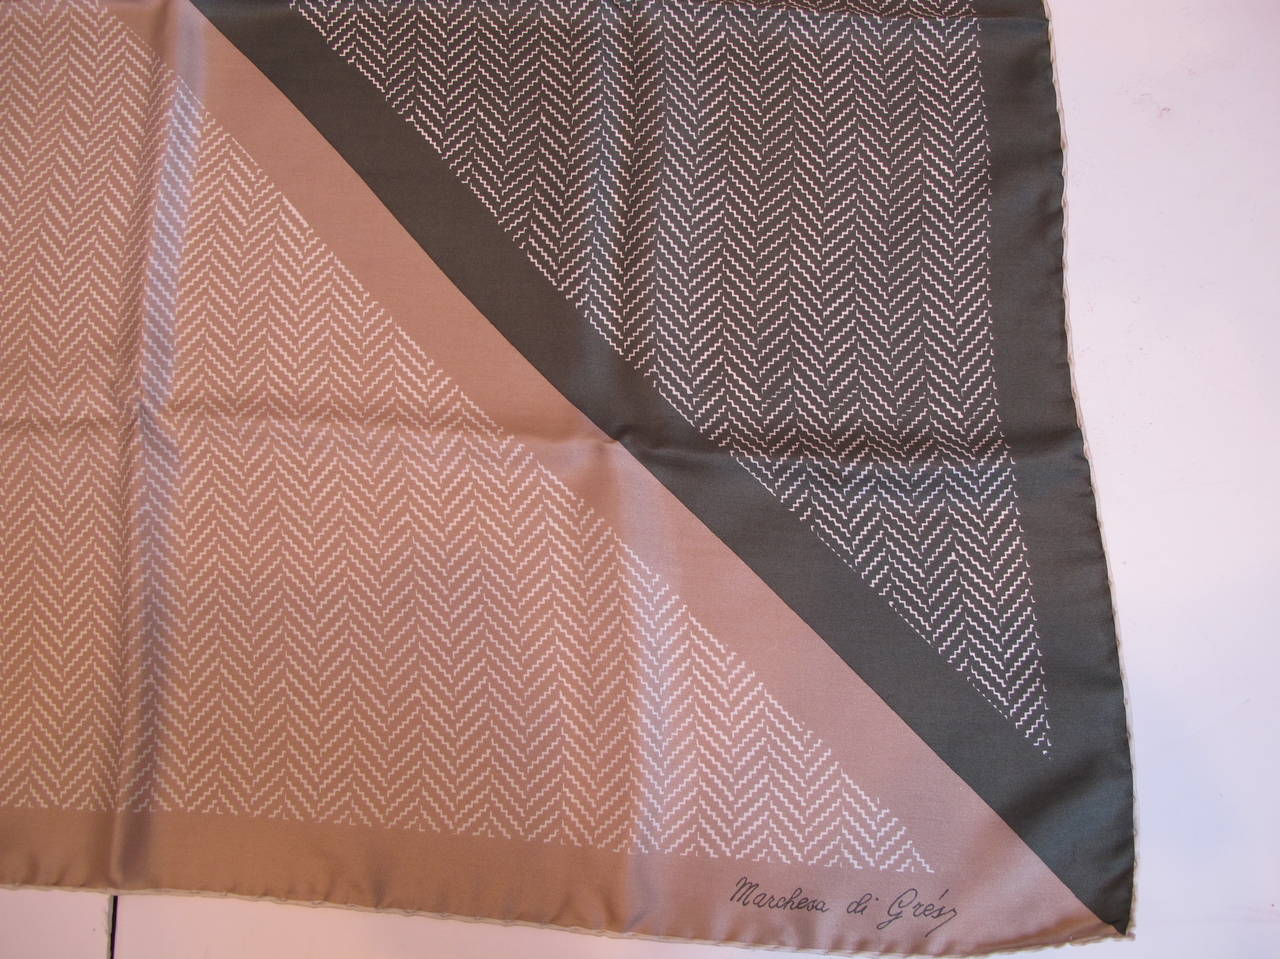 This pure silk scarf has provenance of a famous San Francisco Interior Designer. The hem is hand rolled. The colors of taupe and army green create an elegant background fro Chevron design. The Marchesa di Gres company reigned from 1950's to 1984.